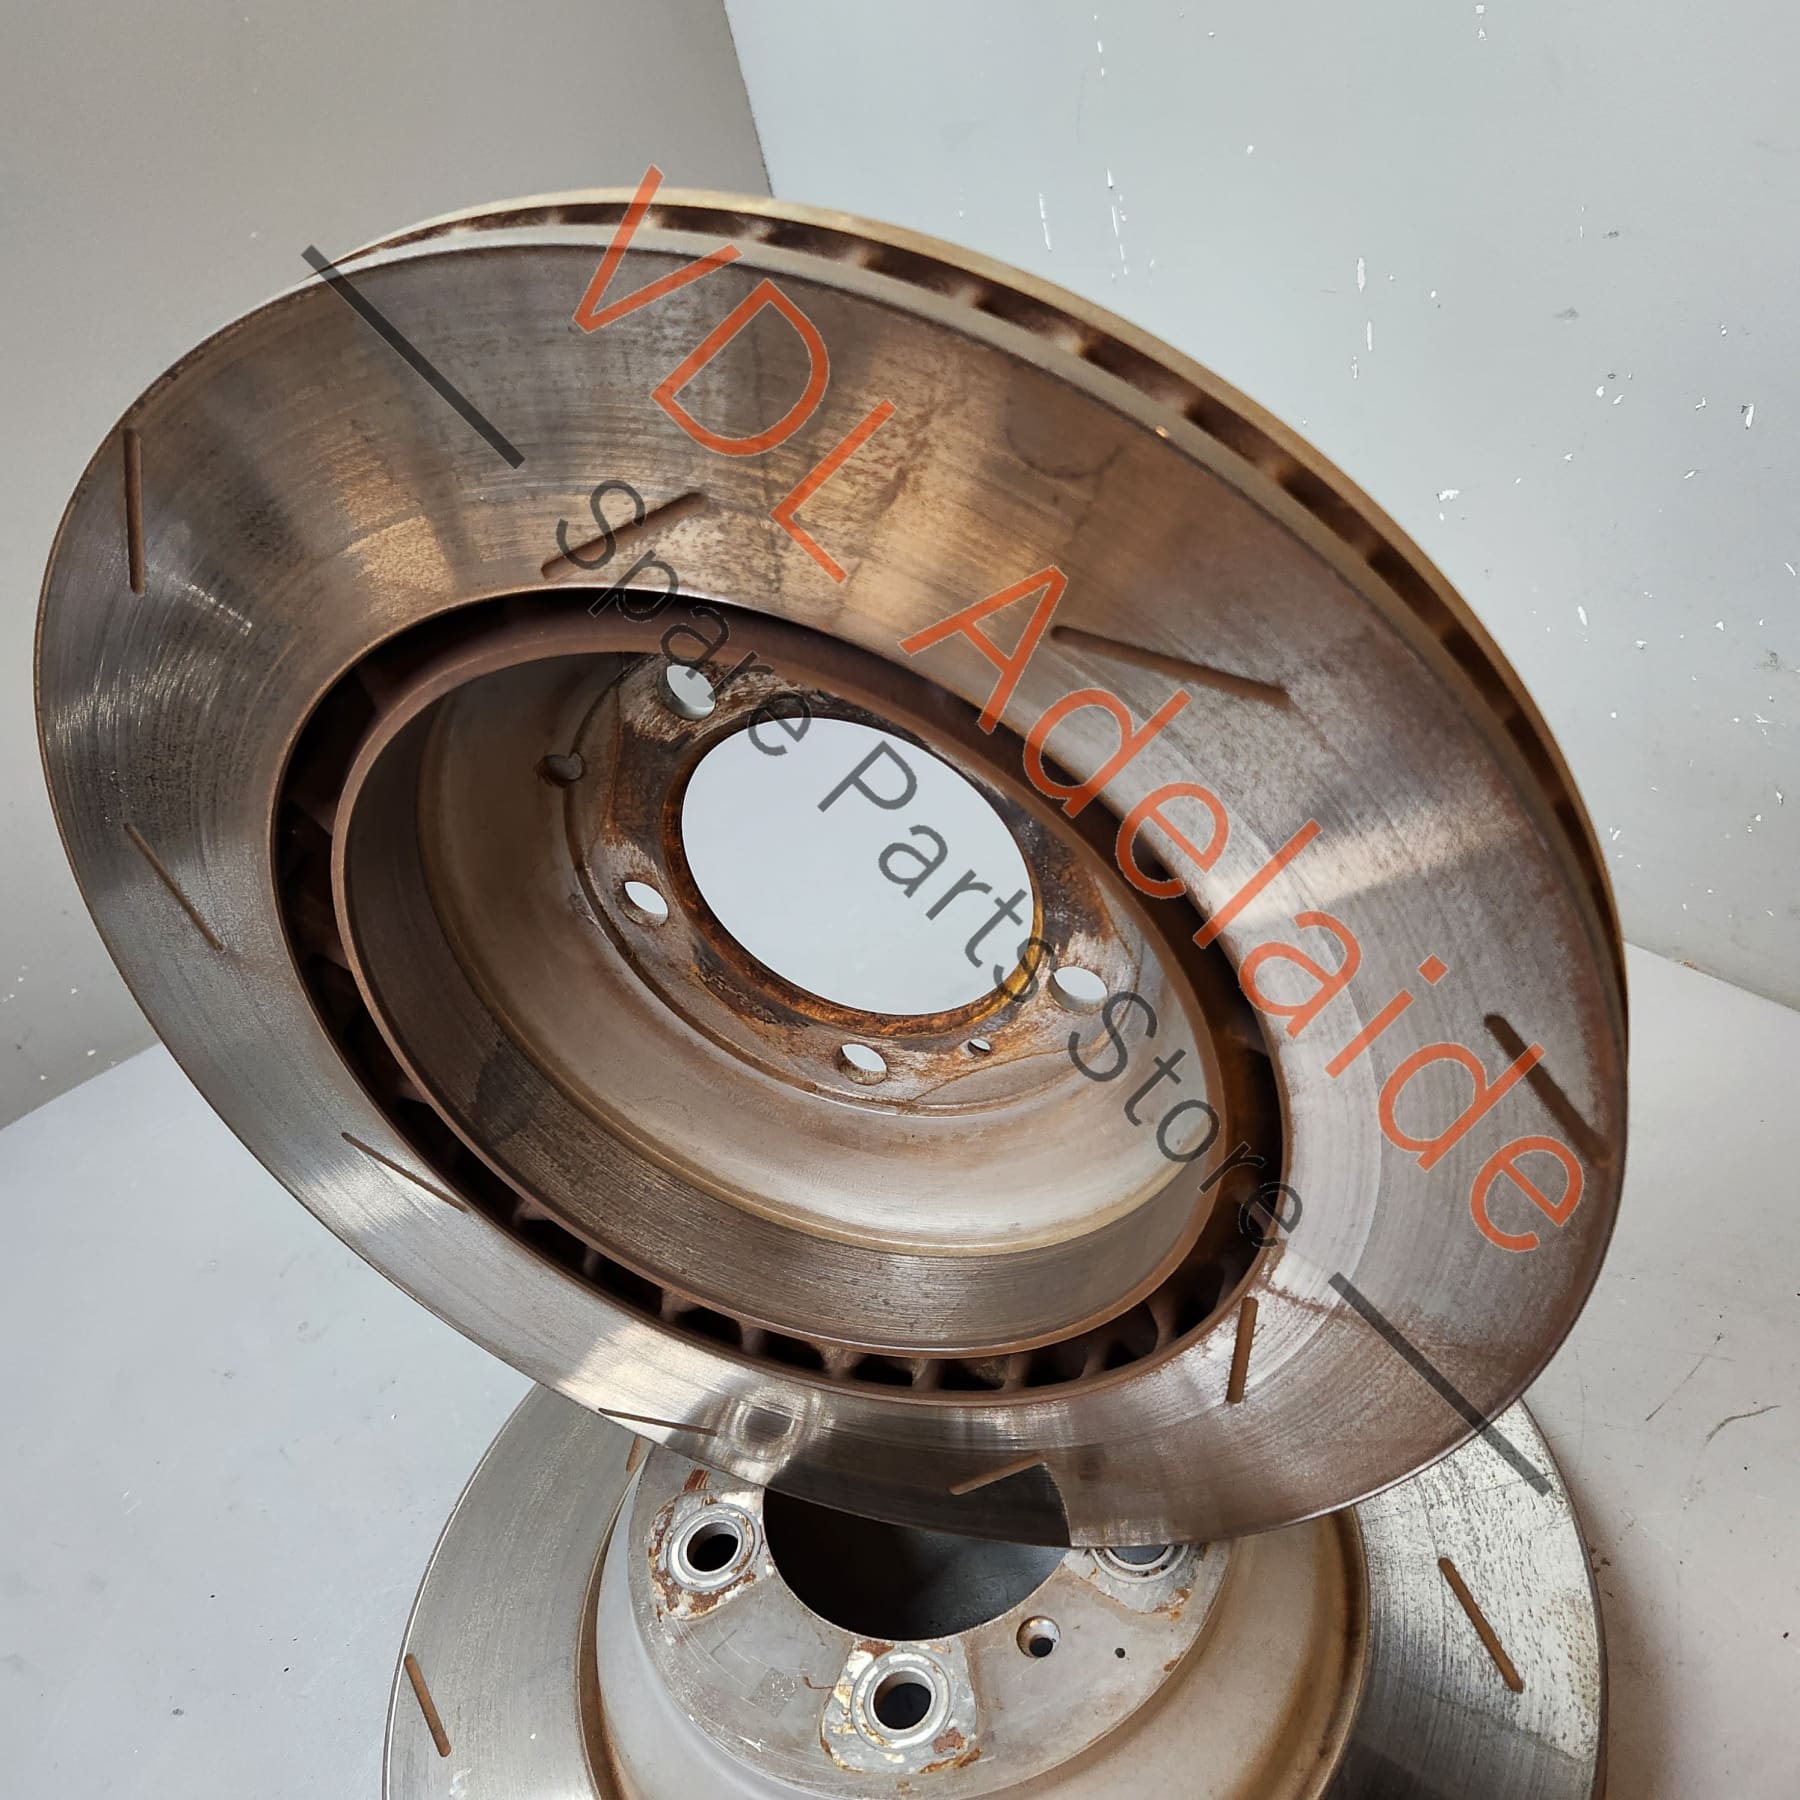 Porsche Panamera 971 Pair of Rear Disc Brake Rotors 390mm Left & Right 971615601J 971615602J     Measured up at 27.5/27.6mm thick. 28mm when new.